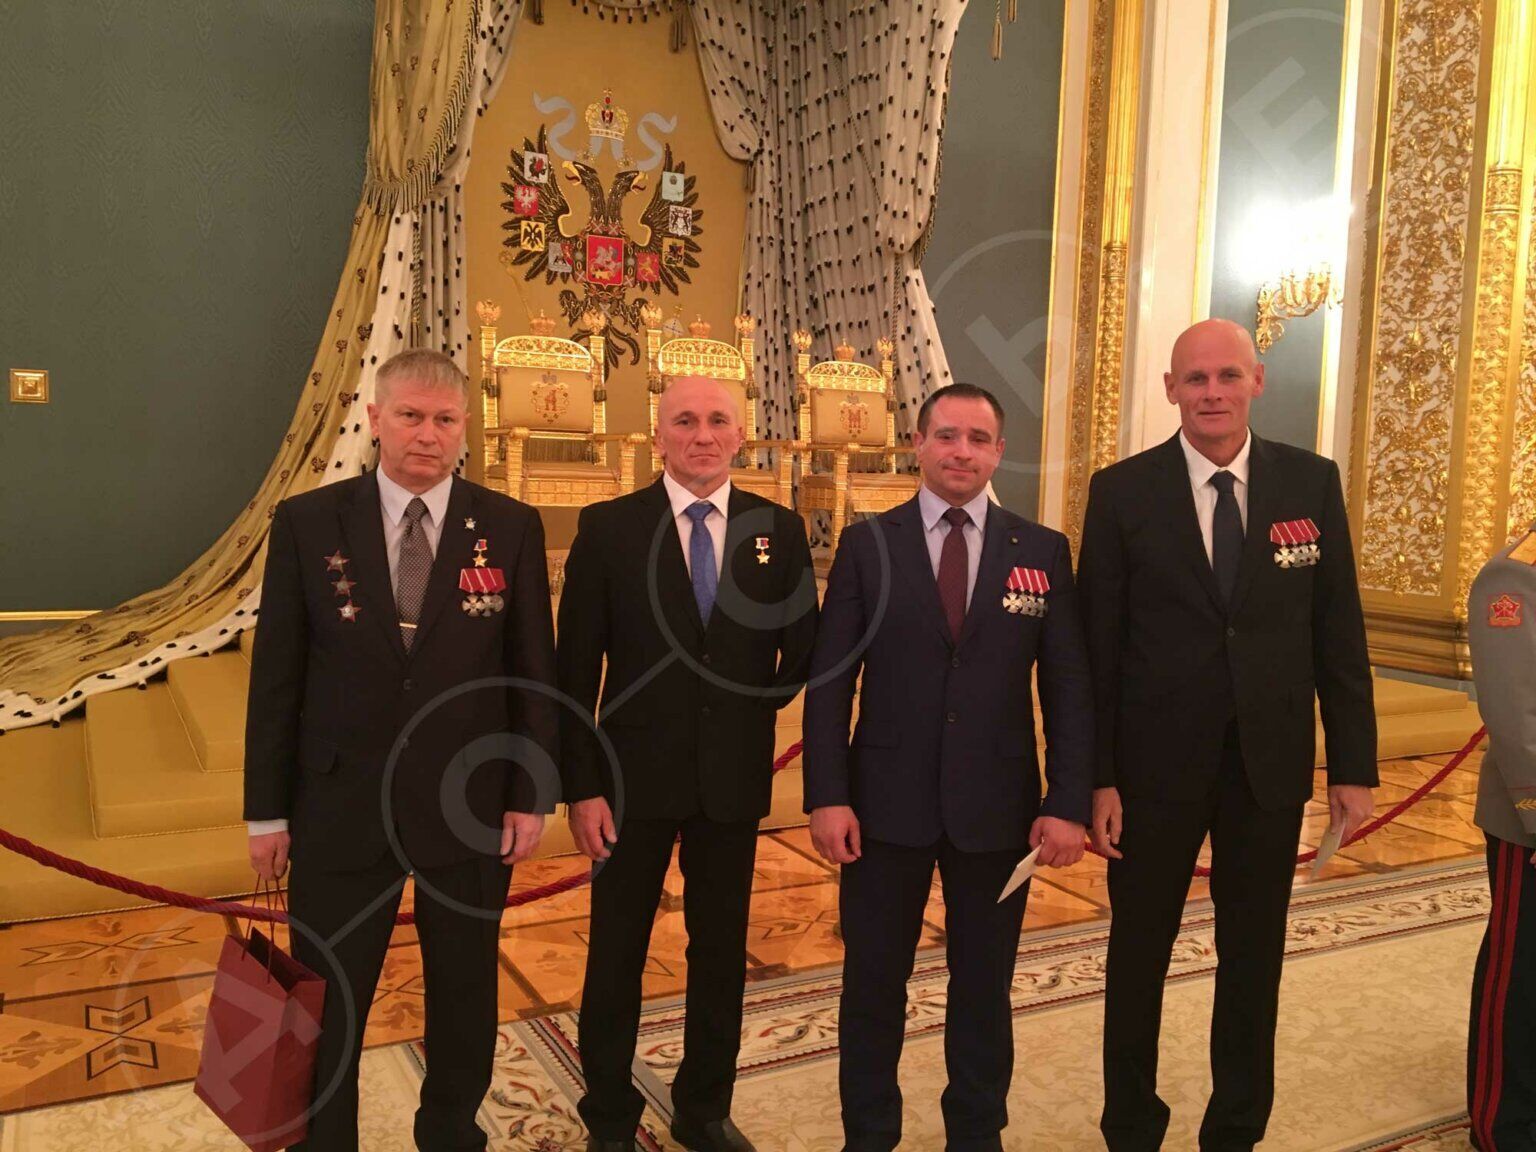 Utkin with other military officers at Putin's reception